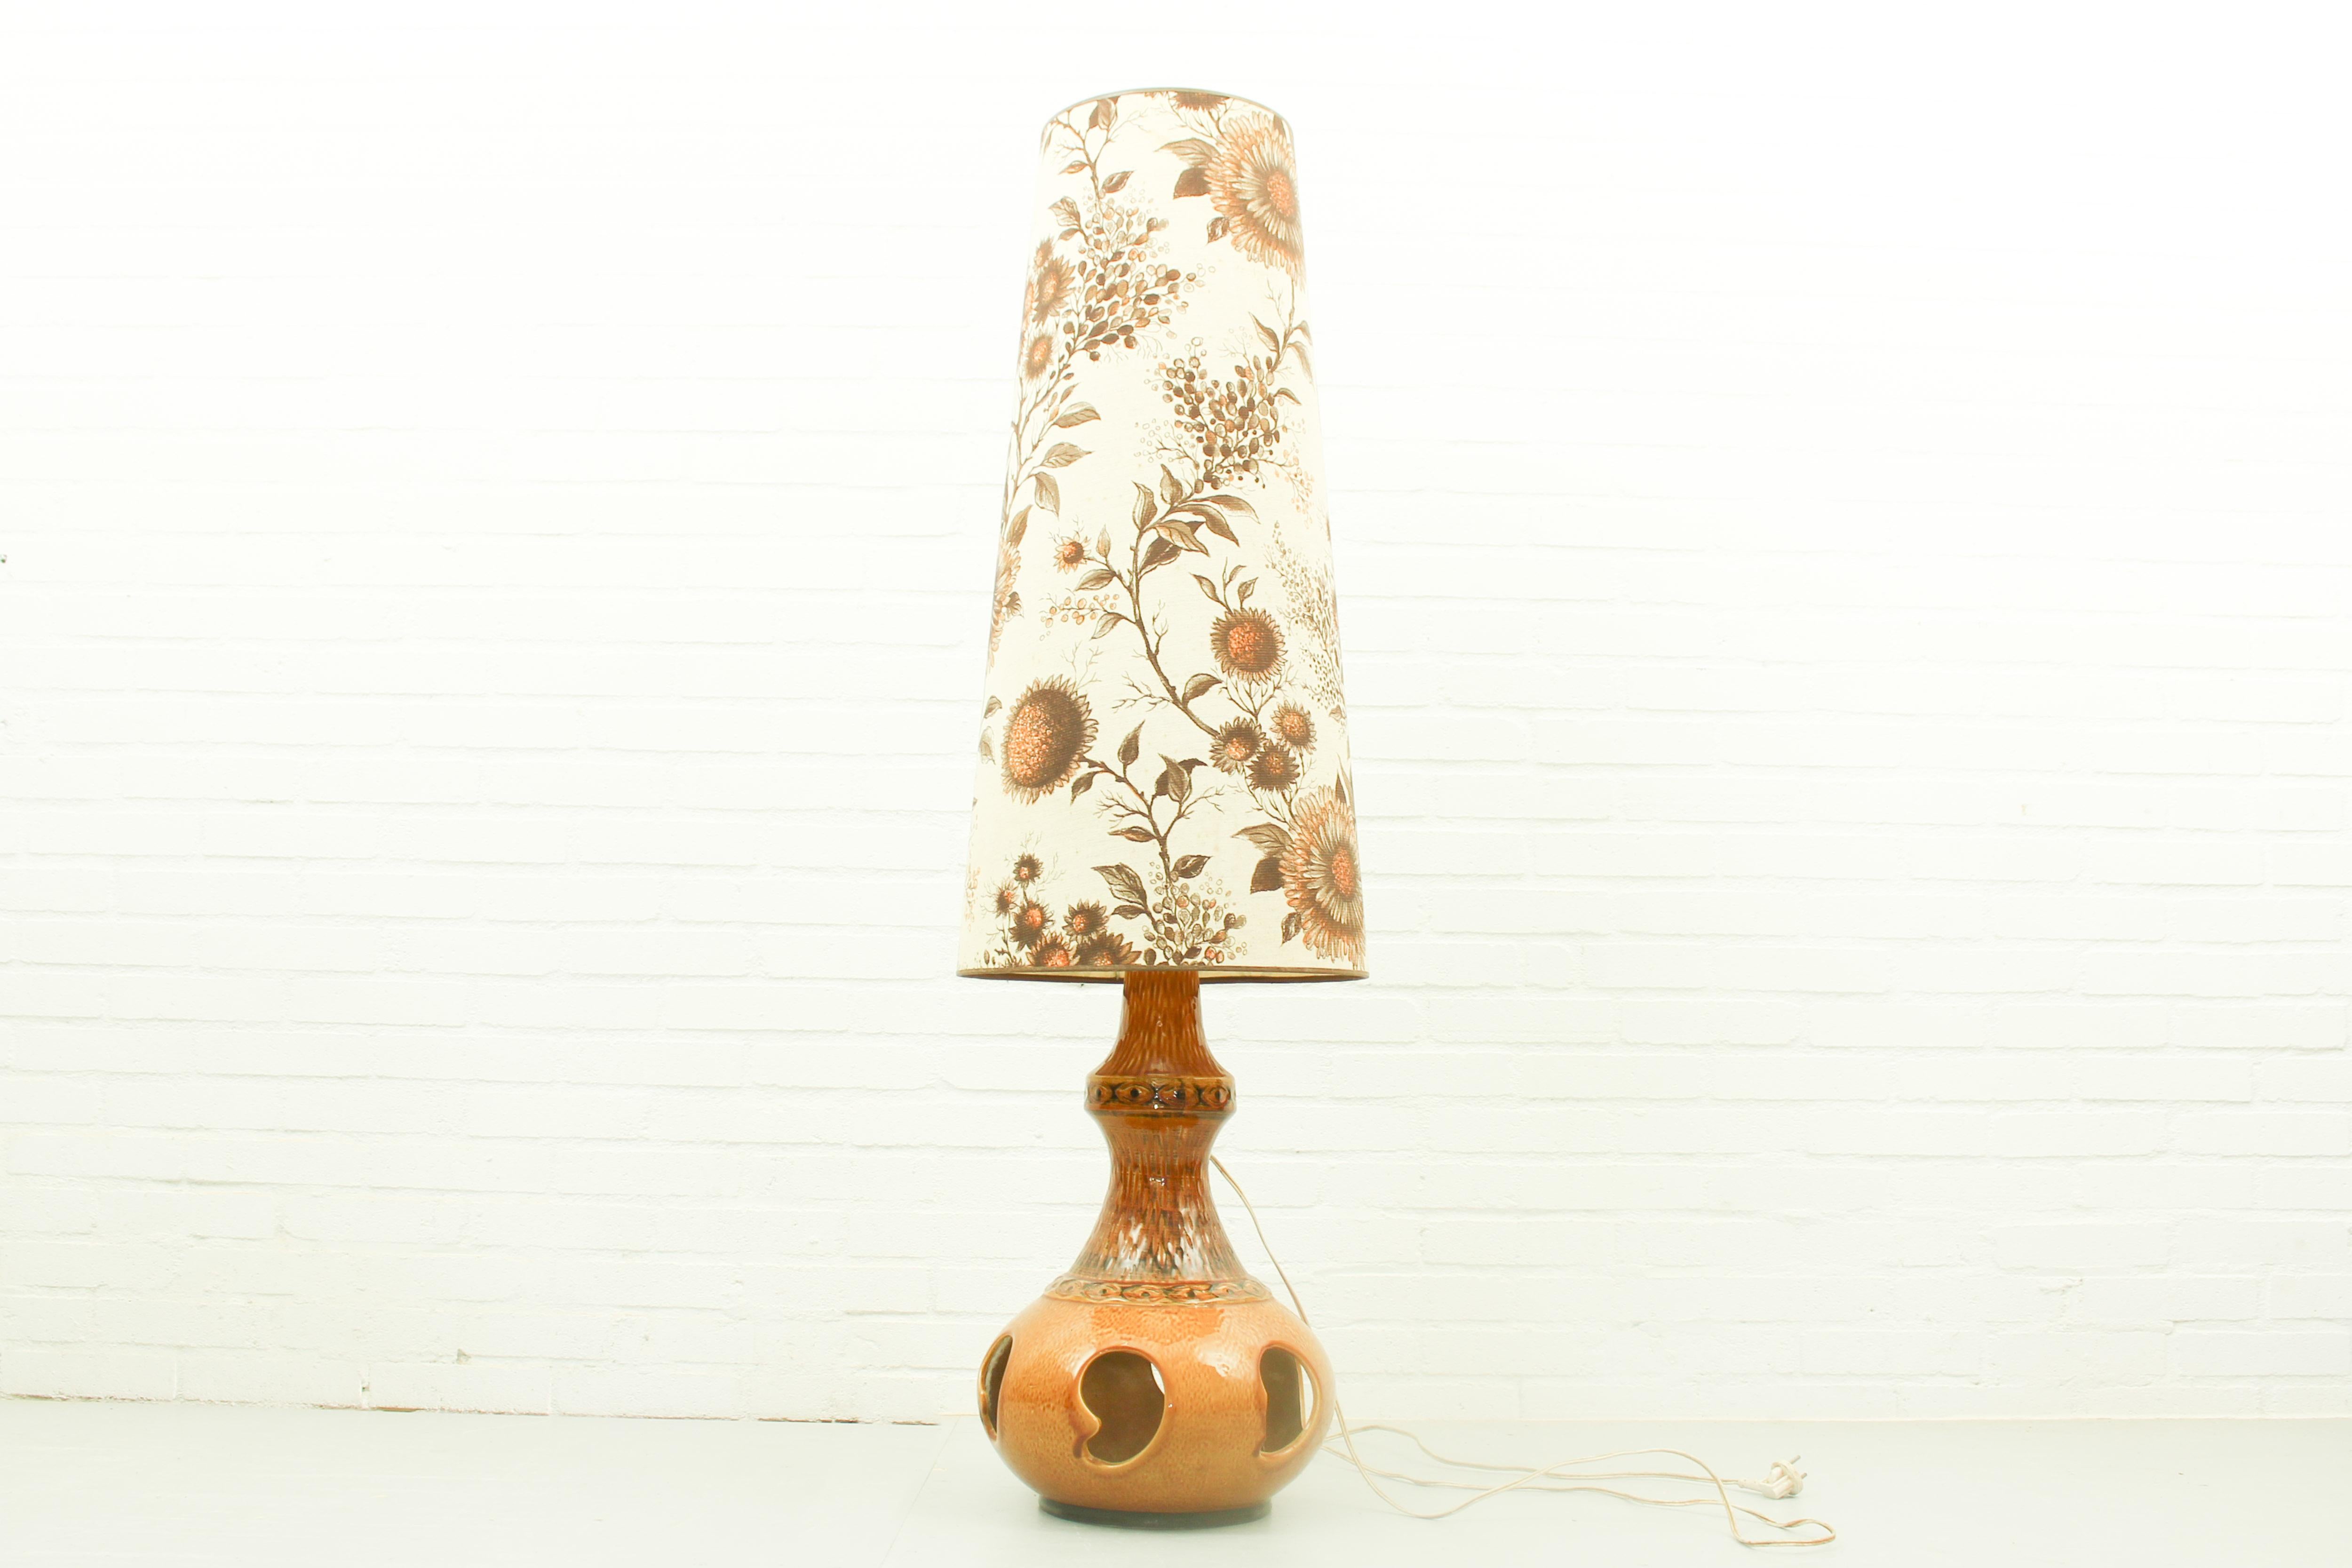 Scheurich style ceramic fat lava floor lamp. The original shade is completely intact, although it does have some stains. Dimensions: 129cm h, 38cm w, 38cm d.
